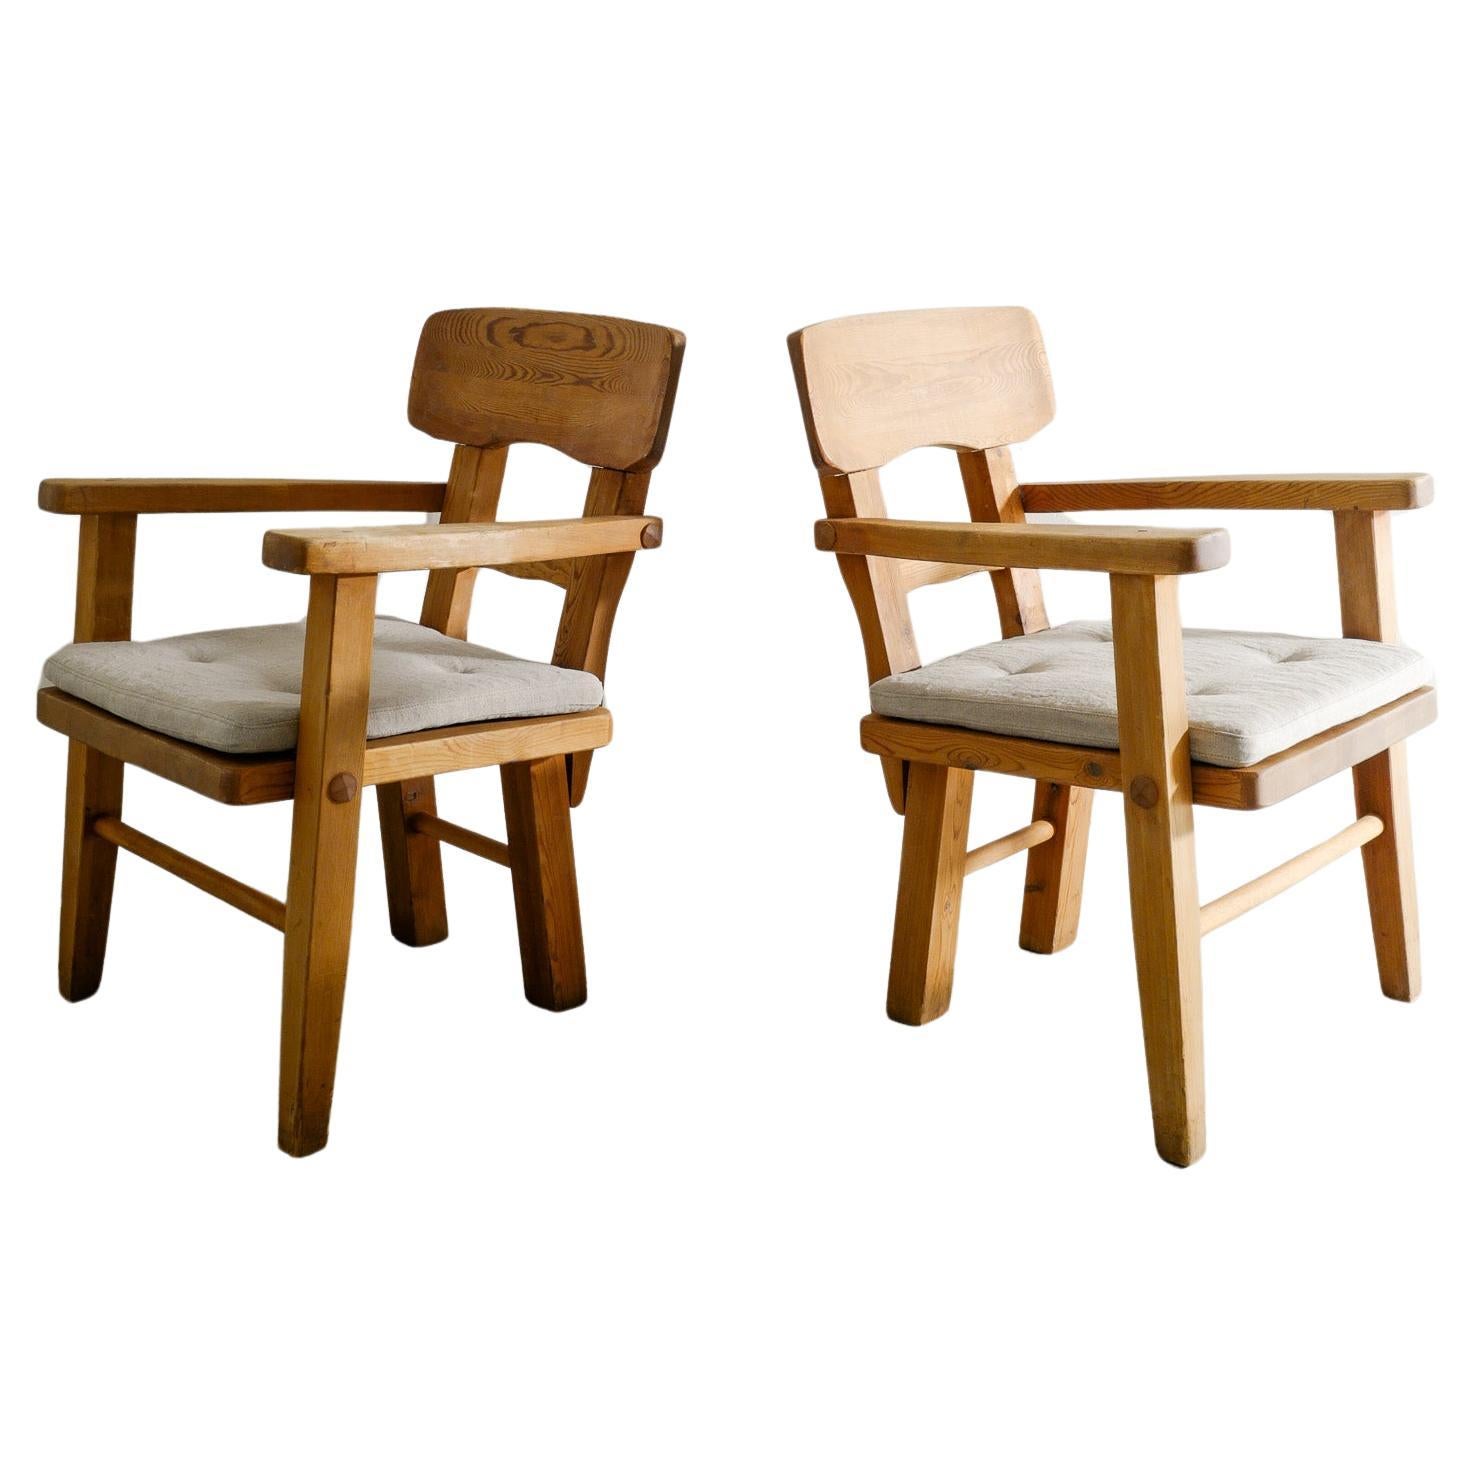 Pair of Swedish Mid Century Wooden Armchairs in Pine Produced by Vemdalia, 1970s For Sale